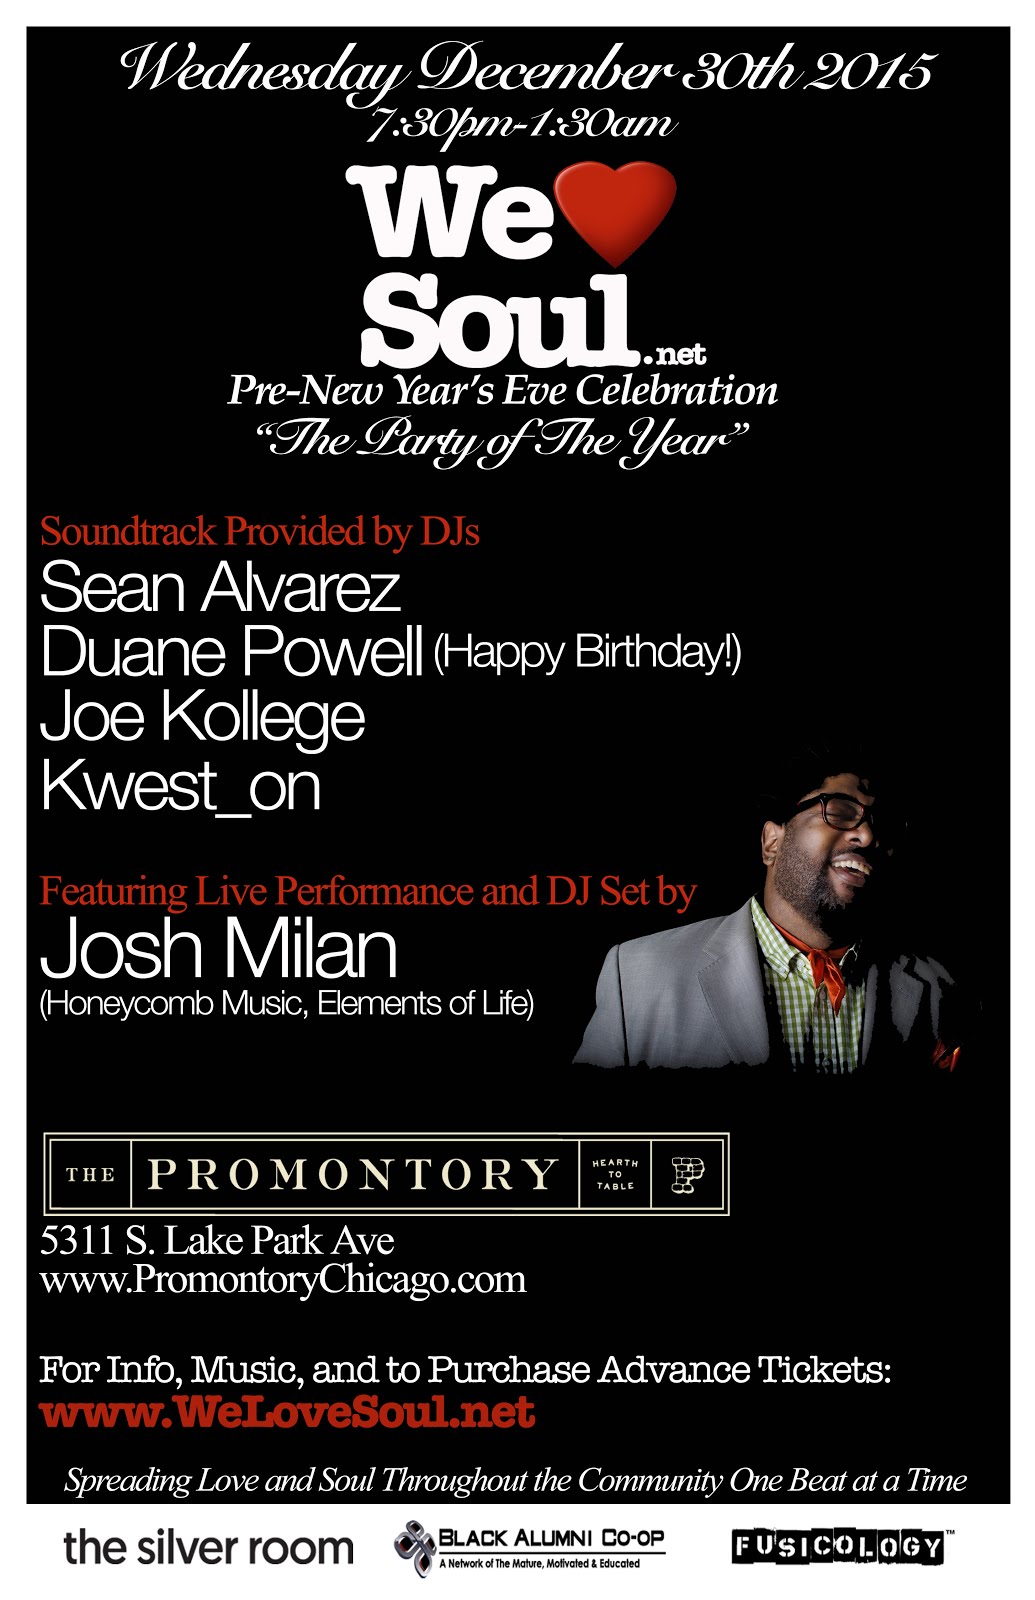 WLS Pre-NYE Celebration "The Party of The Year"